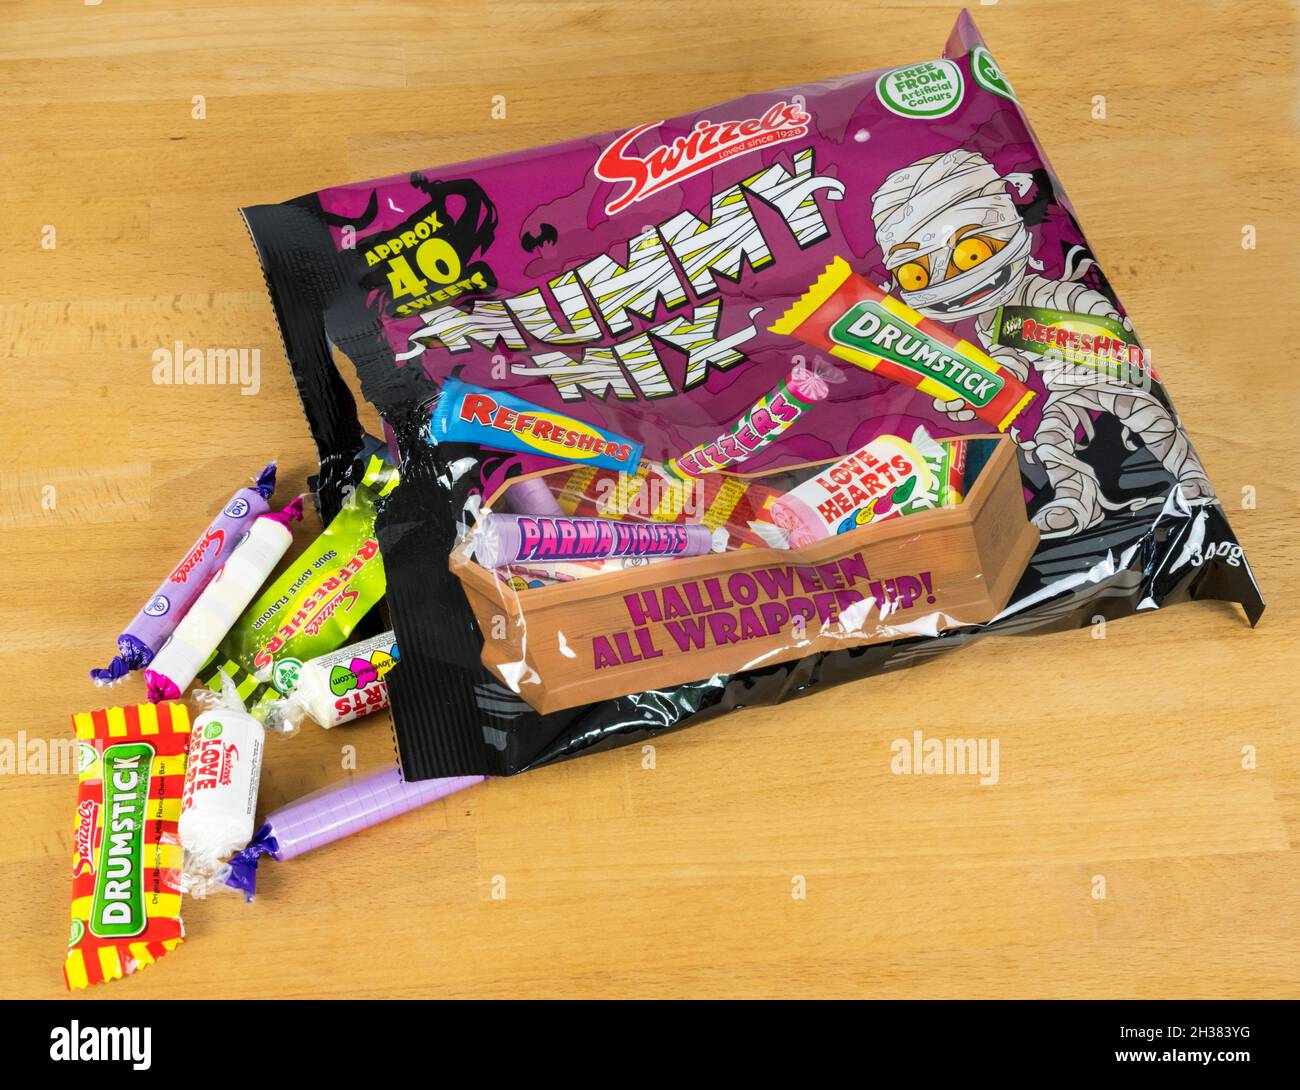 A bag of Swizzels Mummy Mix Halloween sweets. Stock Photo